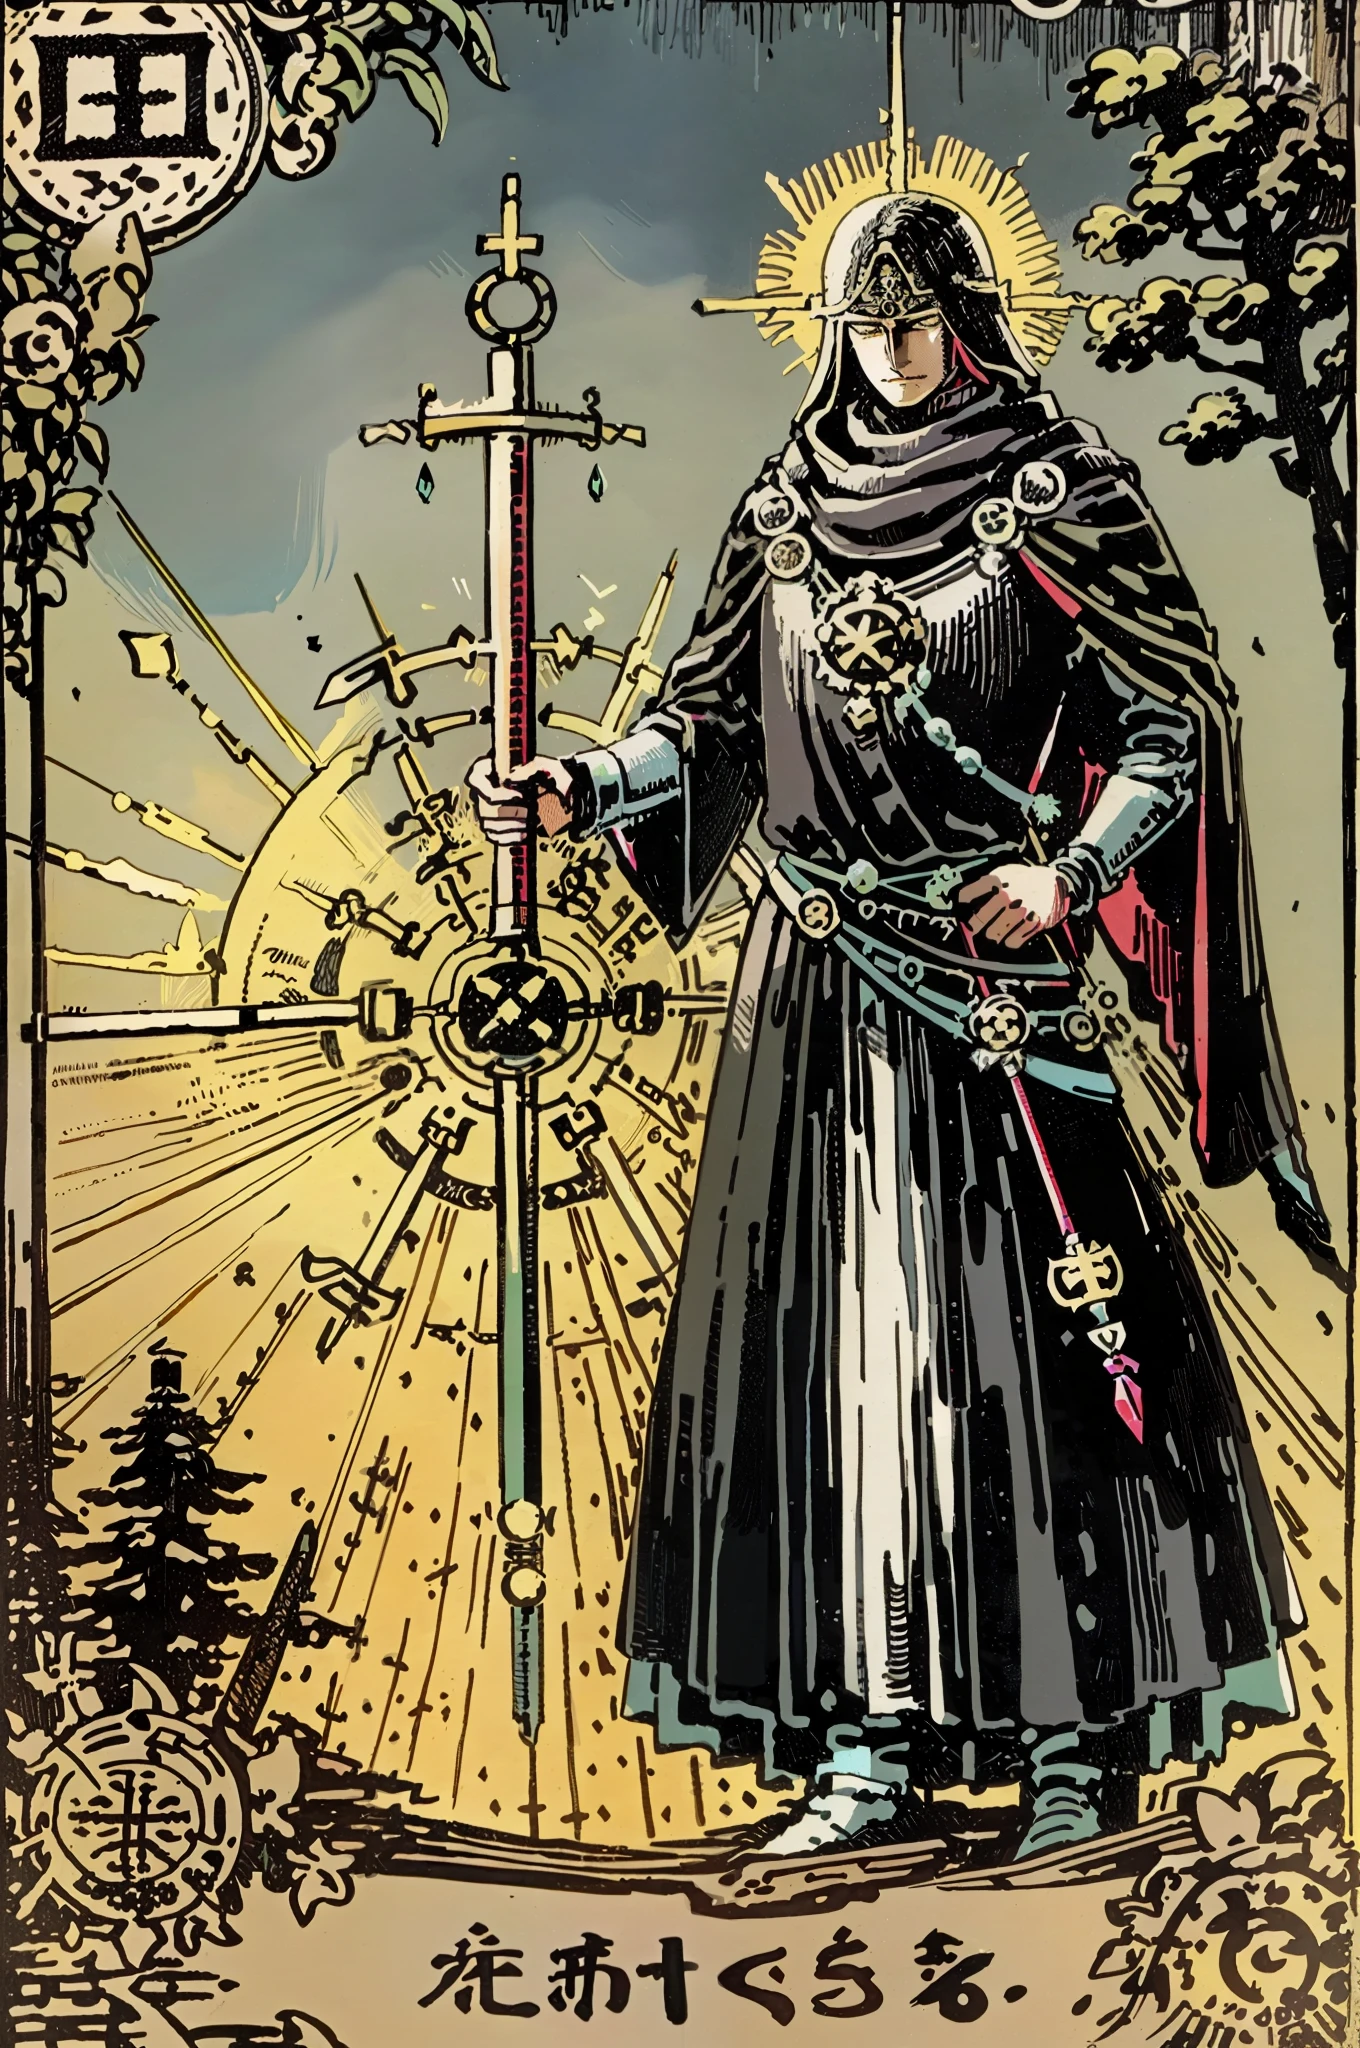 tarot card, the Sage, man (Warrior, sign of Libra), bindle, stick with balance of wisdom and evil, forest, Dark, terror, black sun, dark forest, skulls, magic, divine jewels and props, dynamic action poses, divine armor